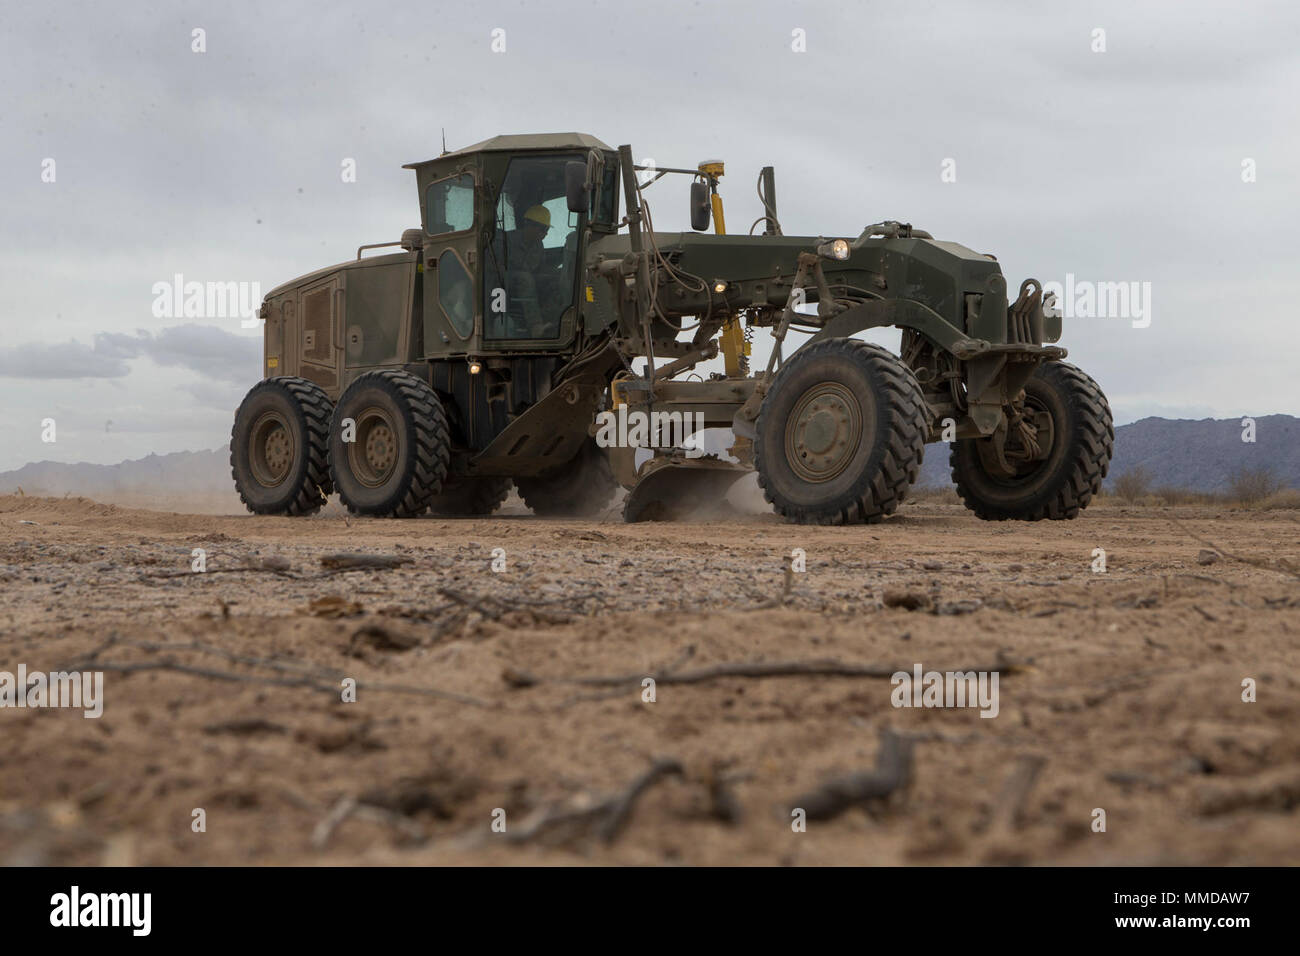 U.S. Marine Corps Pfc. Myles Bautista, a heavy equipment operator with Marine Wing Support Squadron 272, operates a 120m road grader during airfield maintenance in support of Weapons and Tactics Instructor course (WTI) 2-18 at STOVAL Expeditionary Airfield, Dateland, Ariz., March 16, 2018. WTI is a seven-week training event hosted by Marine Aviation Weapons and Tactics Squadron One (MAWTS-1) cadre, which emphasizes operational integration of the six functions of Marine Corps aviation in support of a Marine Air Ground Task Force and provides standardized advanced tactical training and certifica Stock Photo